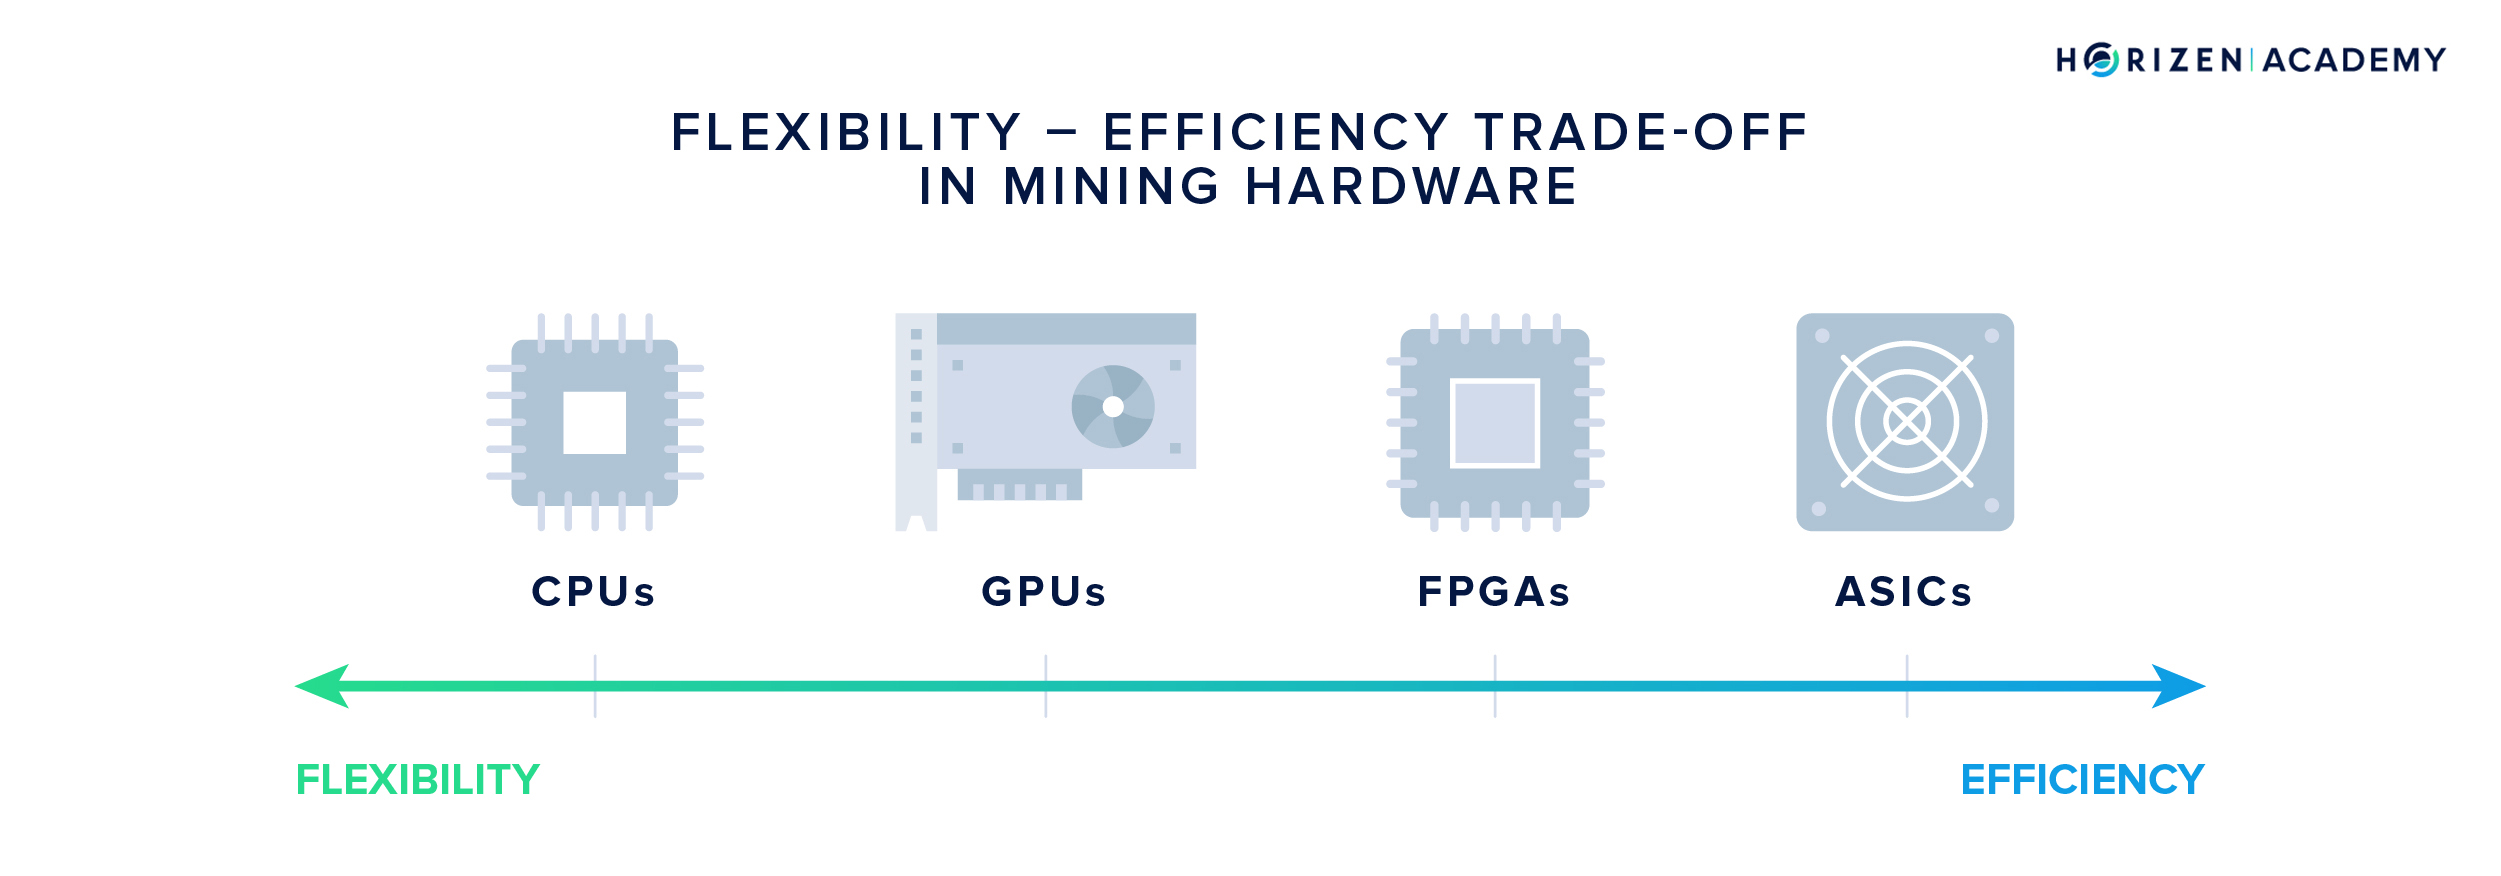 Flexibility - Efficiency Trade-Off in Mining Hardware: CPUs, GPUs, FPGAs and ASICs